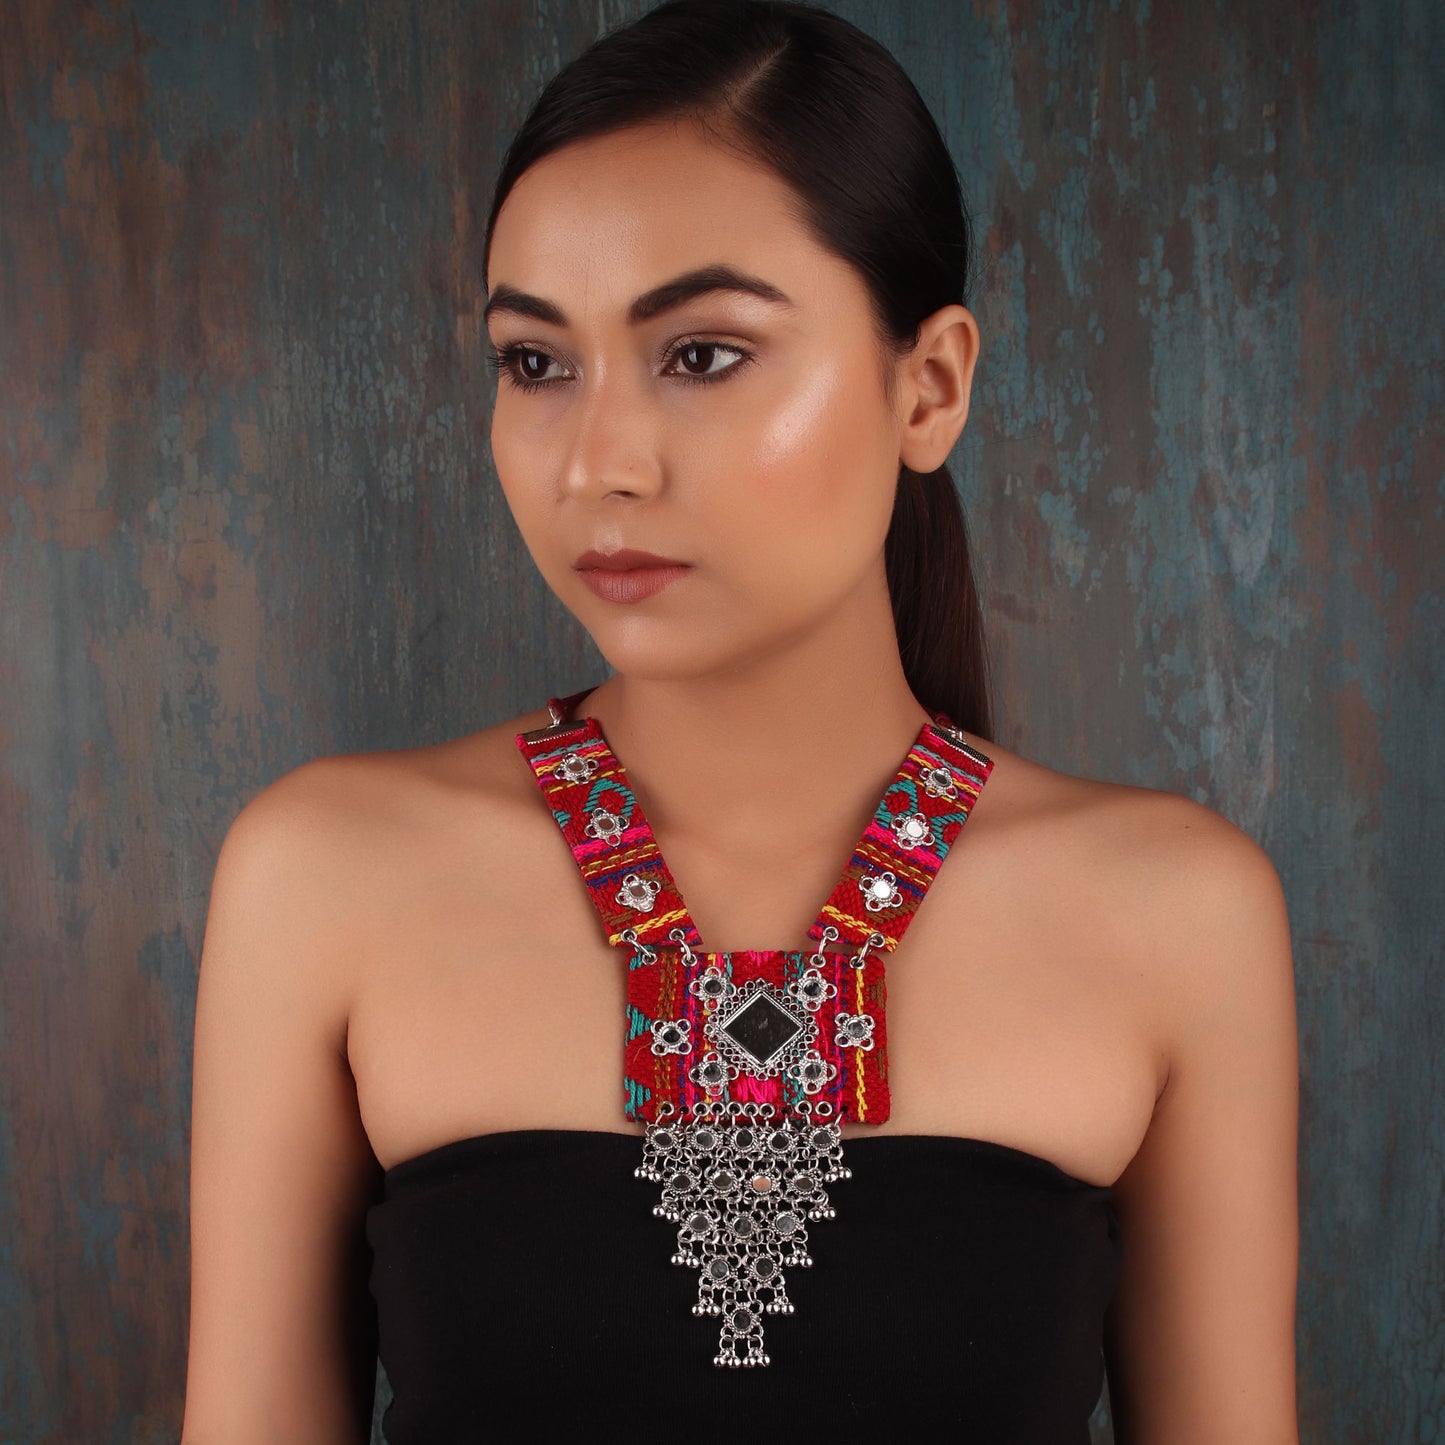 Necklace,The Naayika Necklace in Maroon - Cippele Multi Store